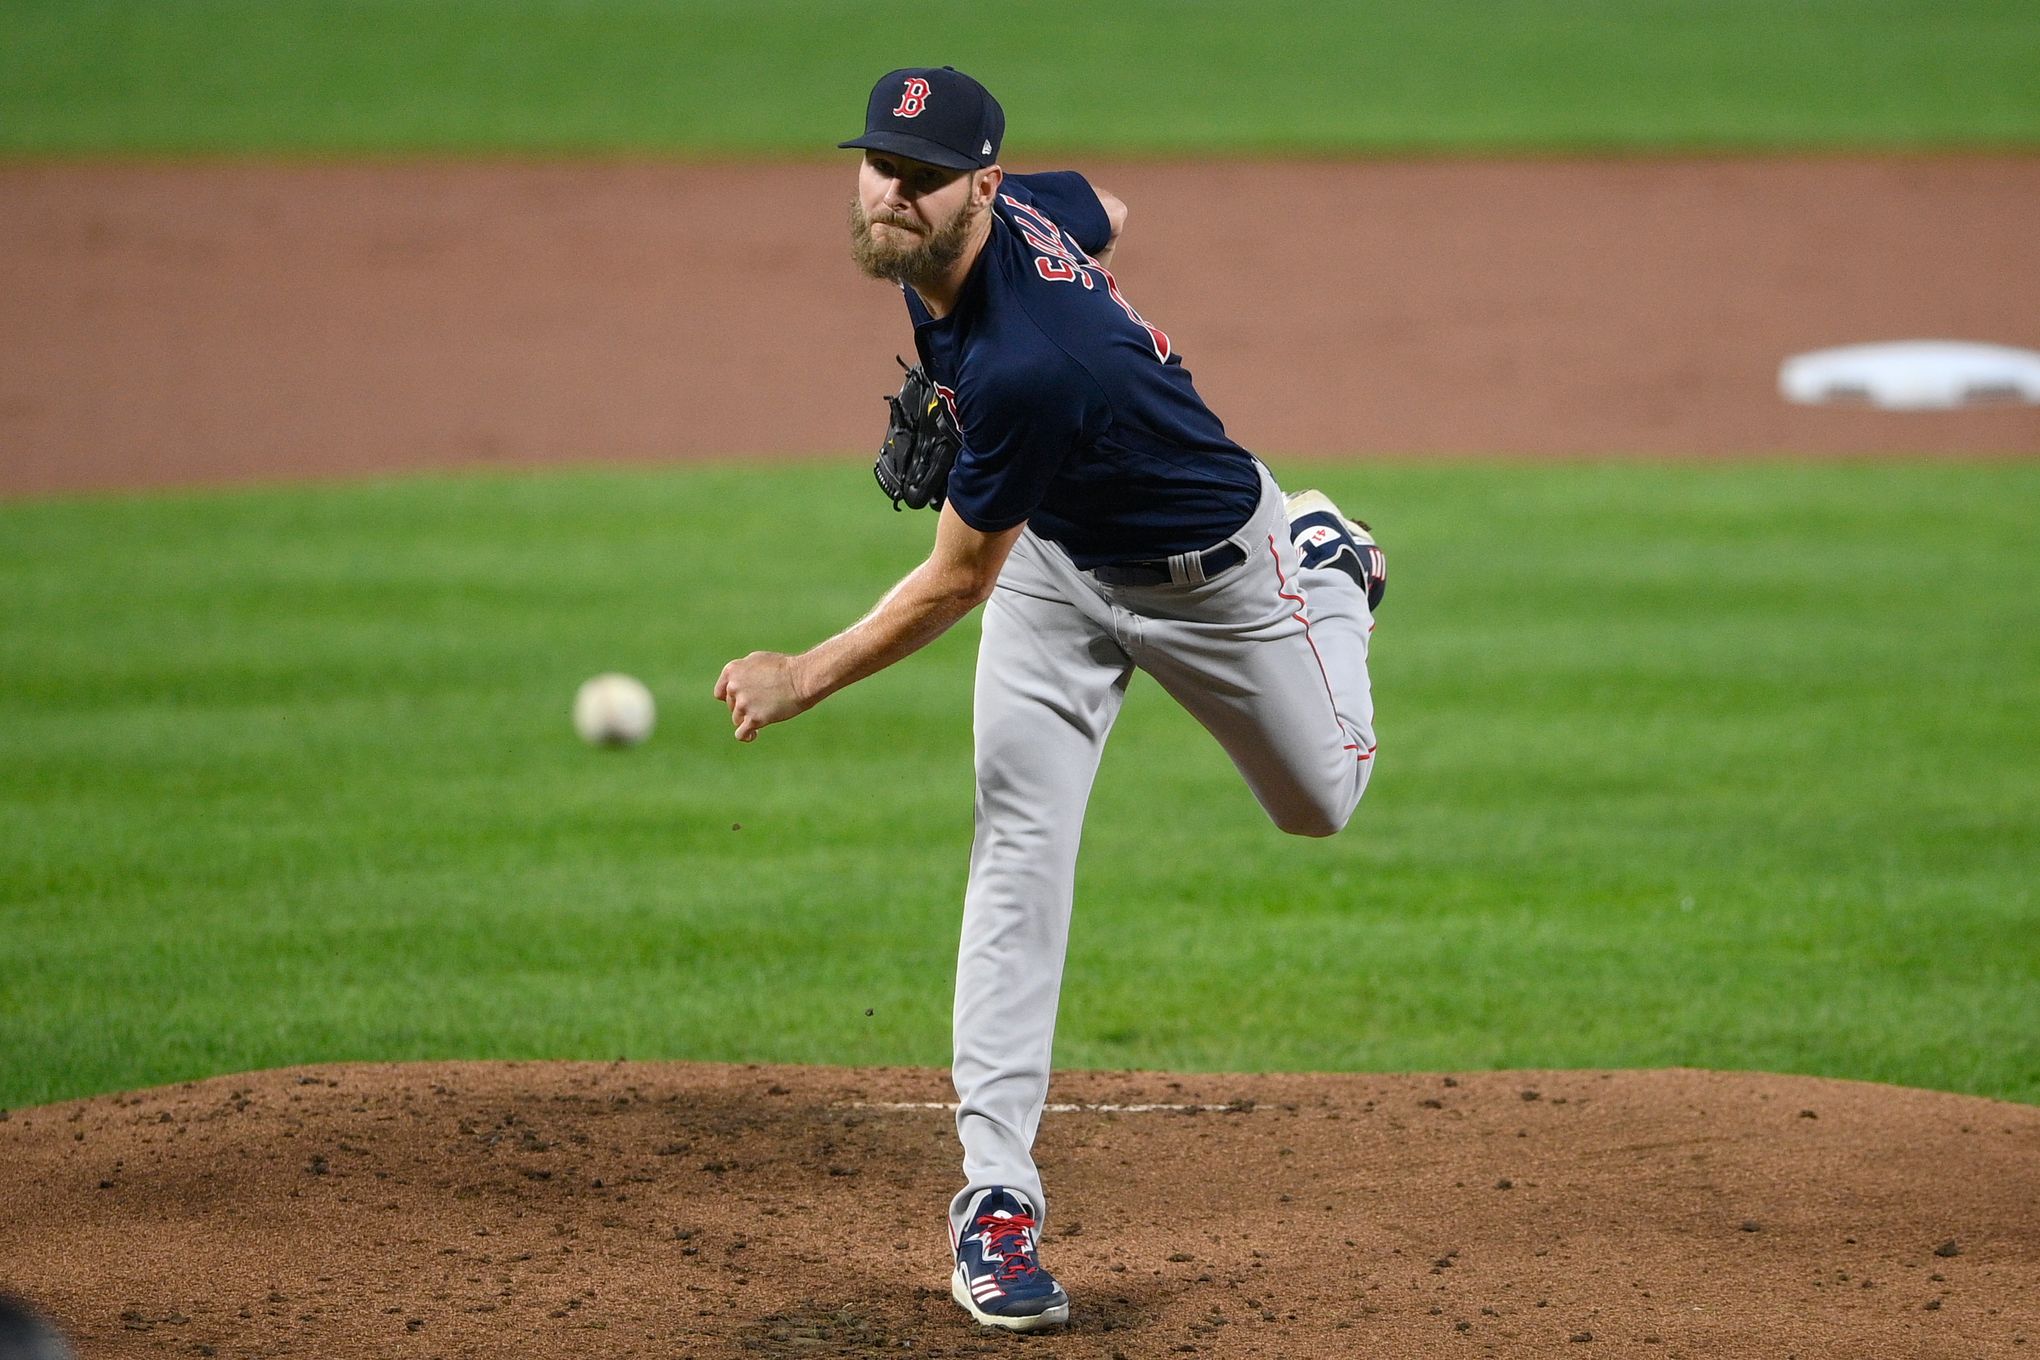 Red Sox pitcher Chris Sale placed on 60-day IL due to shoulder injury